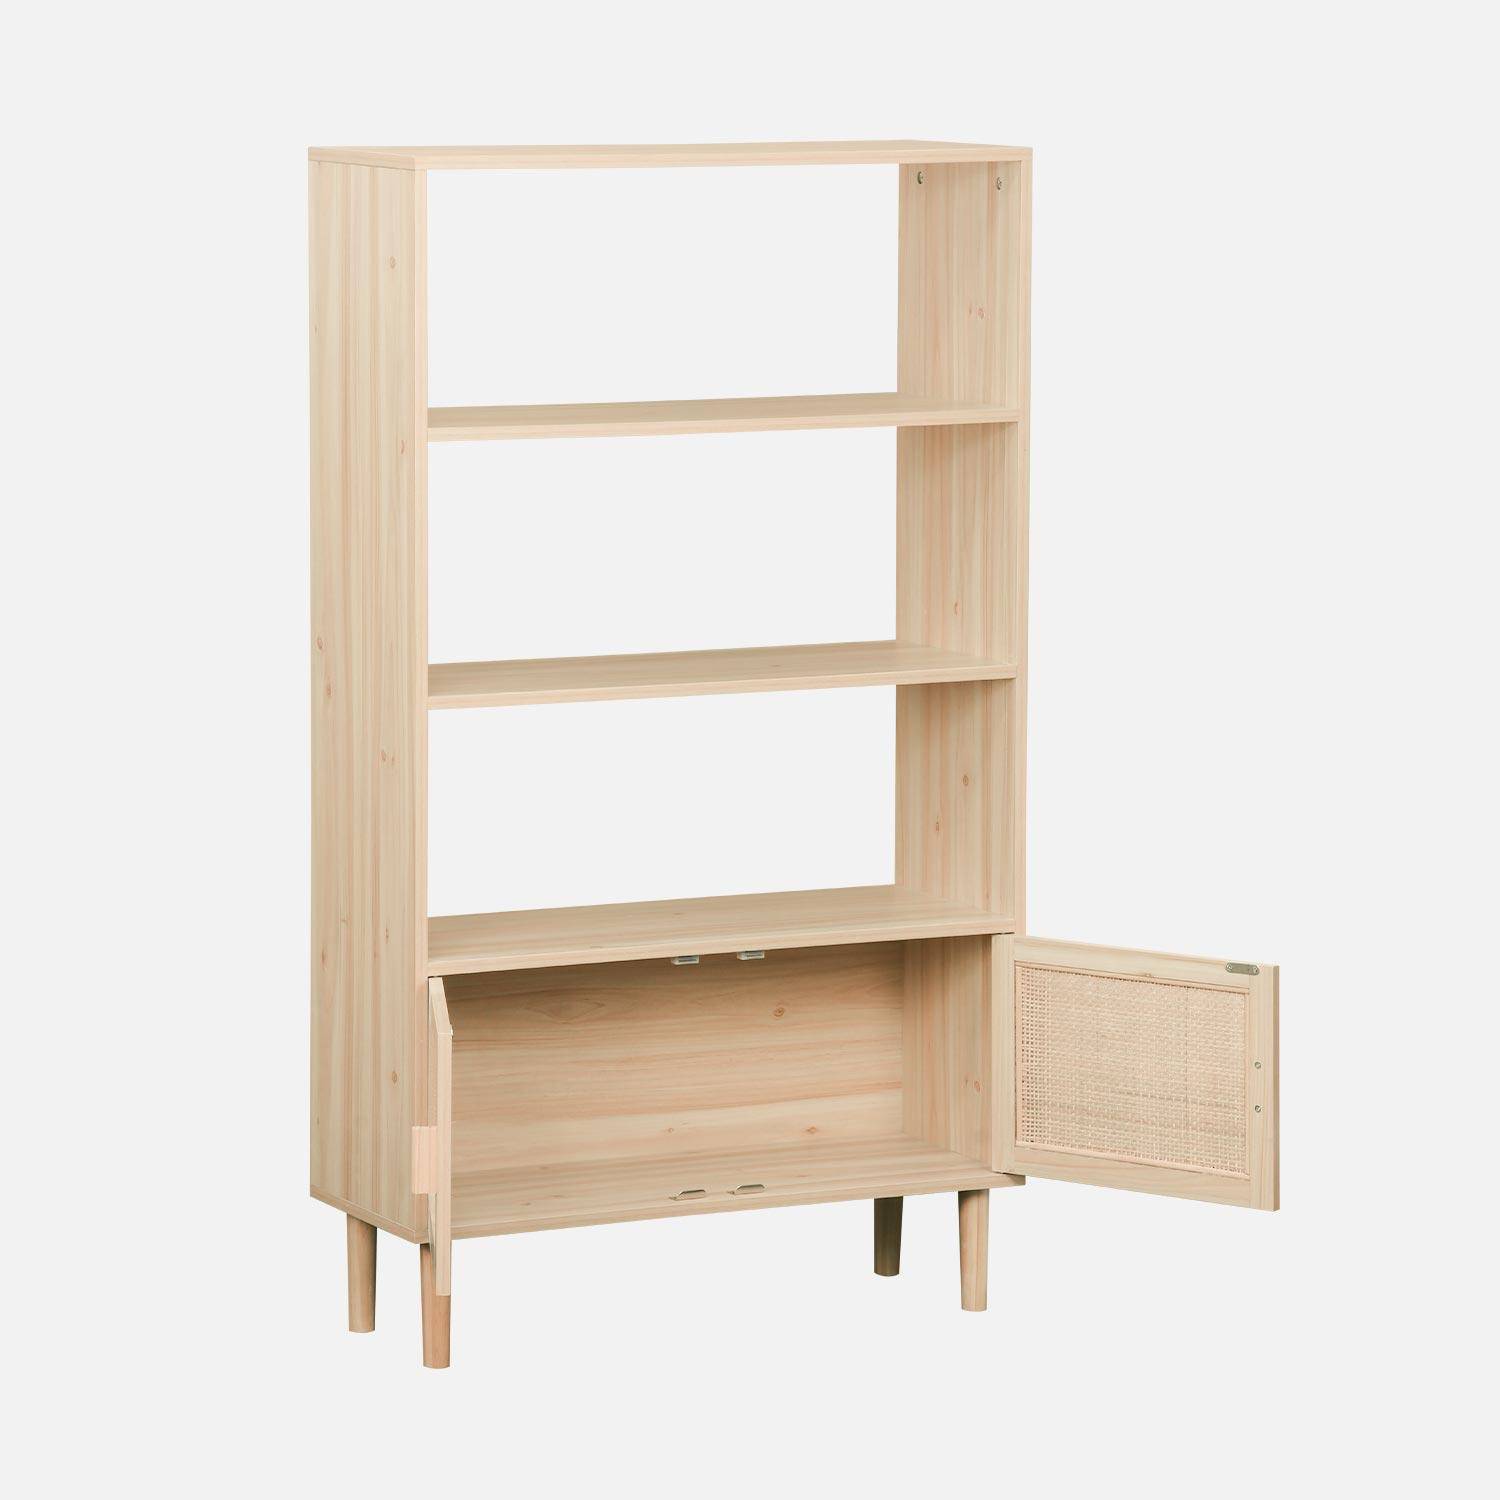 Woven rattan bookcase with storage cupboard, 3 shelves, 2 doors, 80x30x140cm - Camargue - Natural,sweeek,Photo5